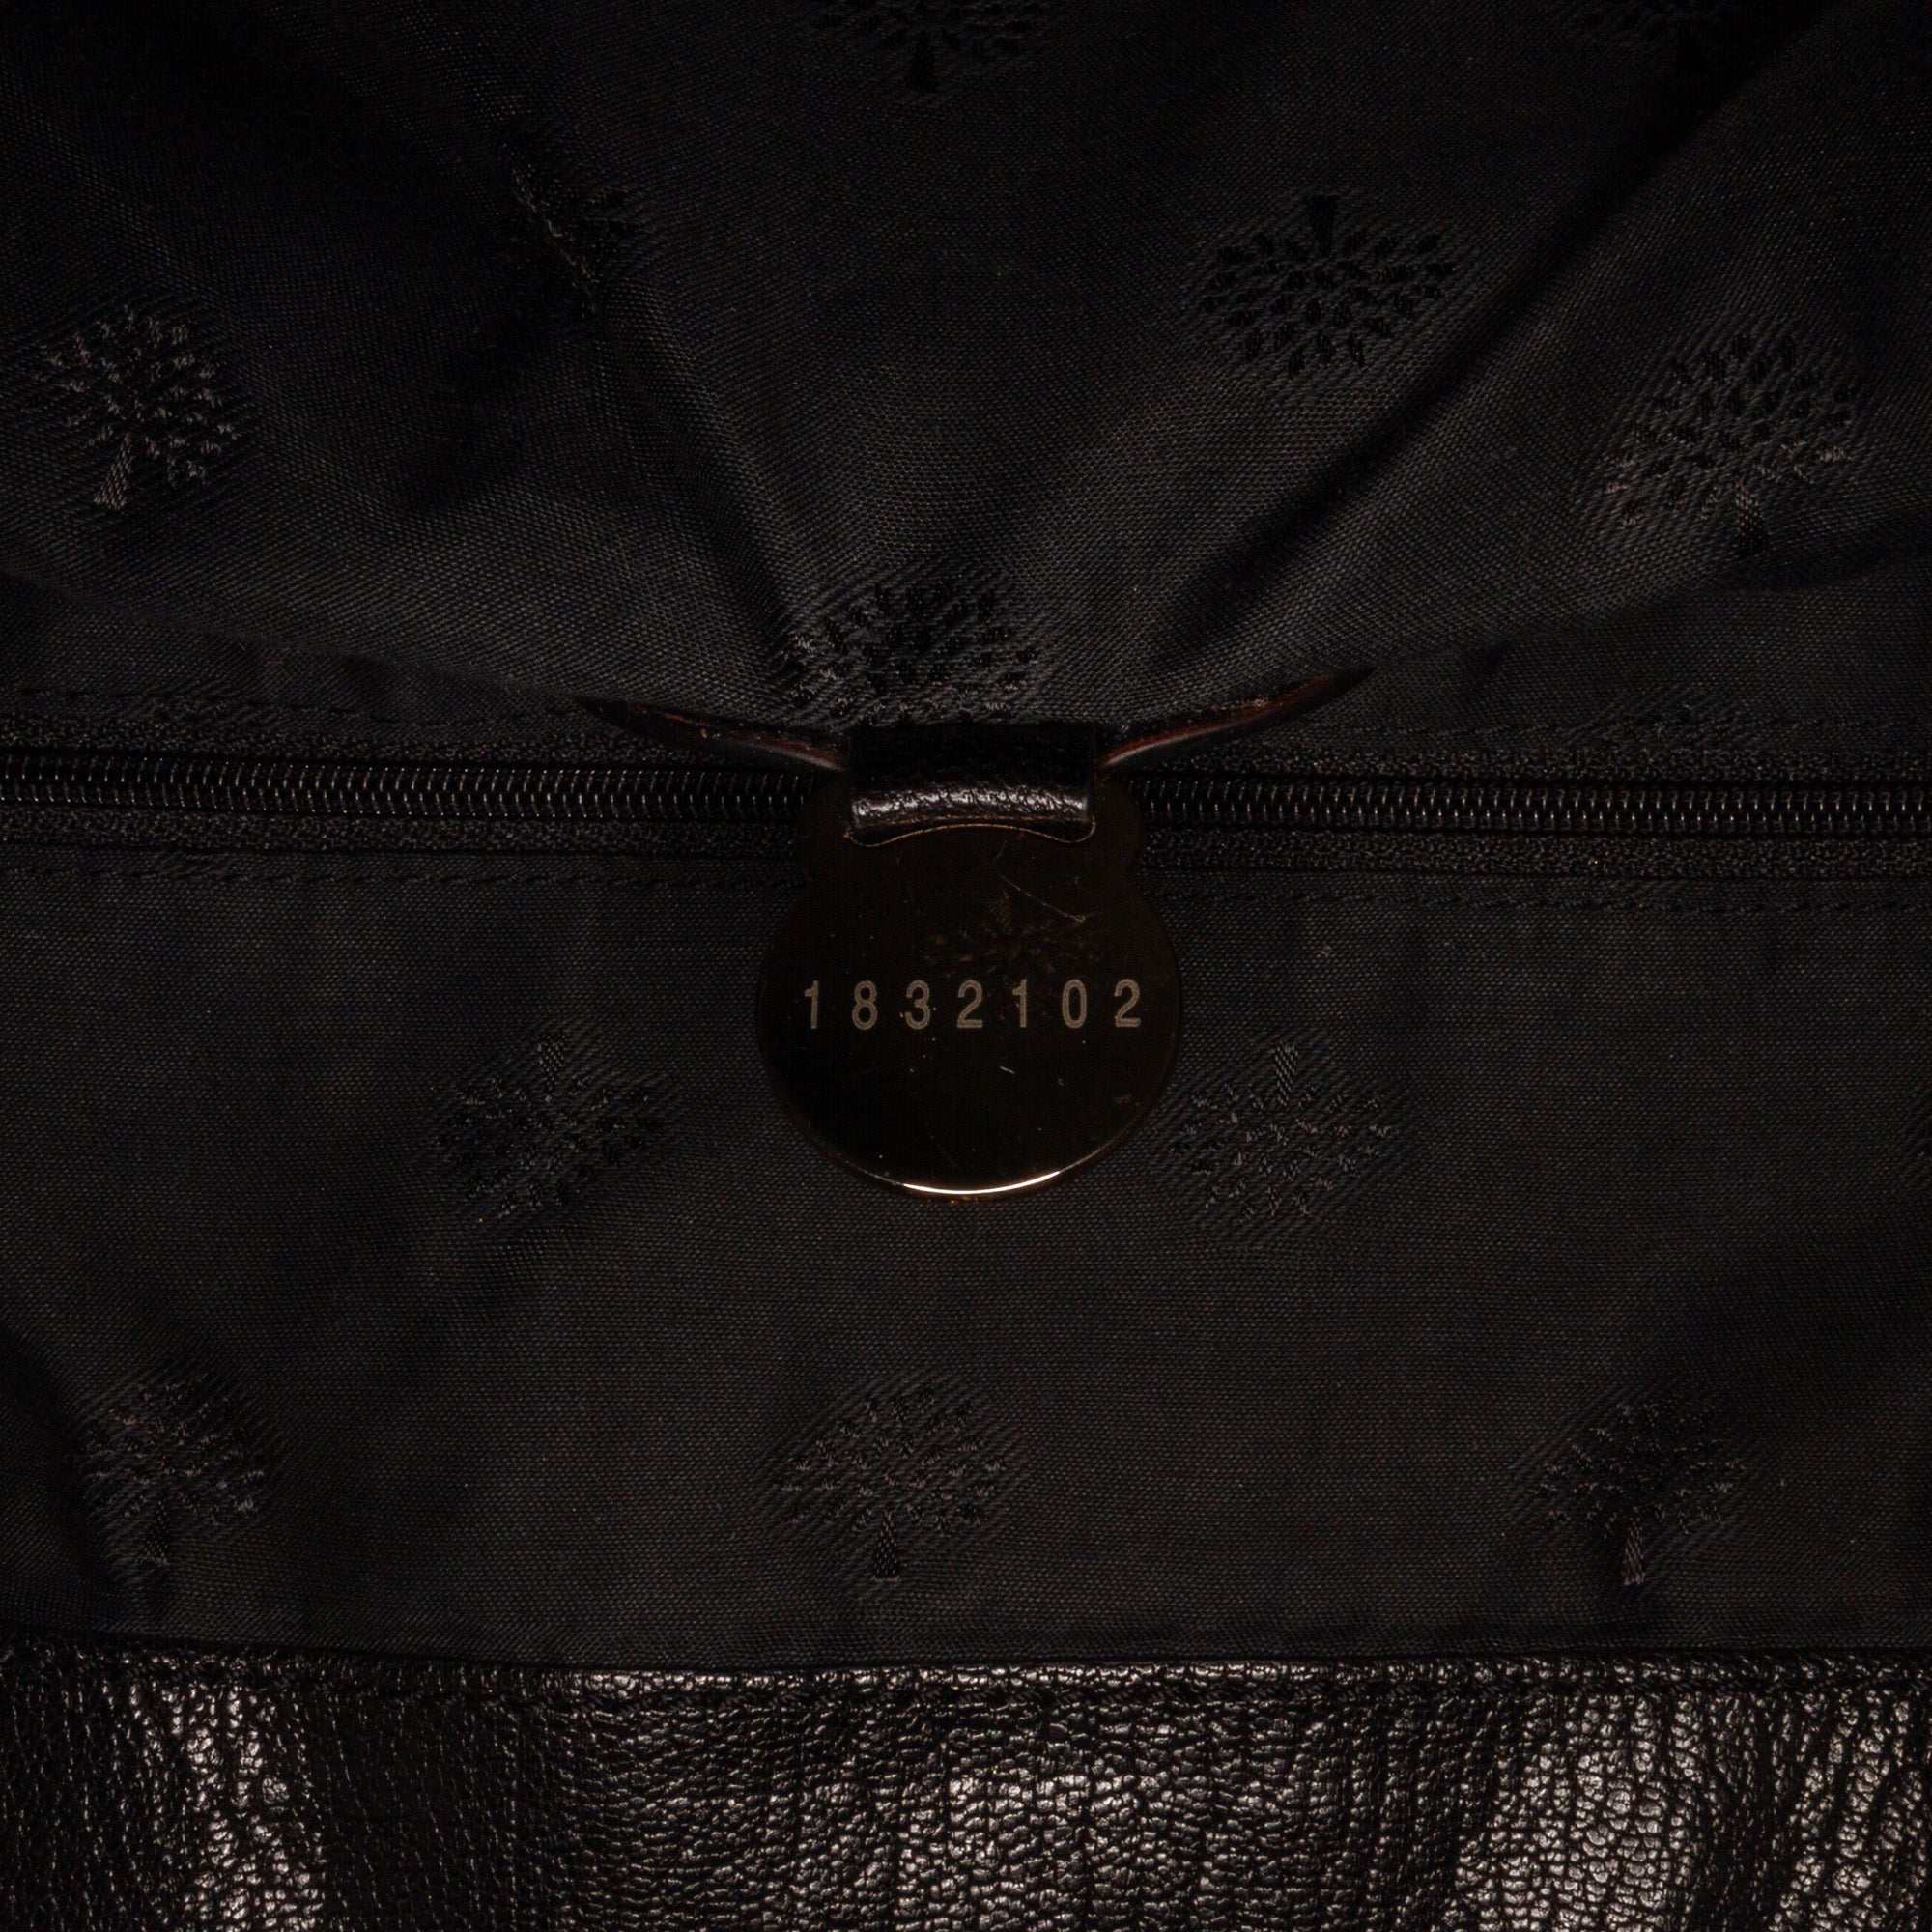 Fake serial number  Mulberry bag, Mulberry, Mulberry handbags